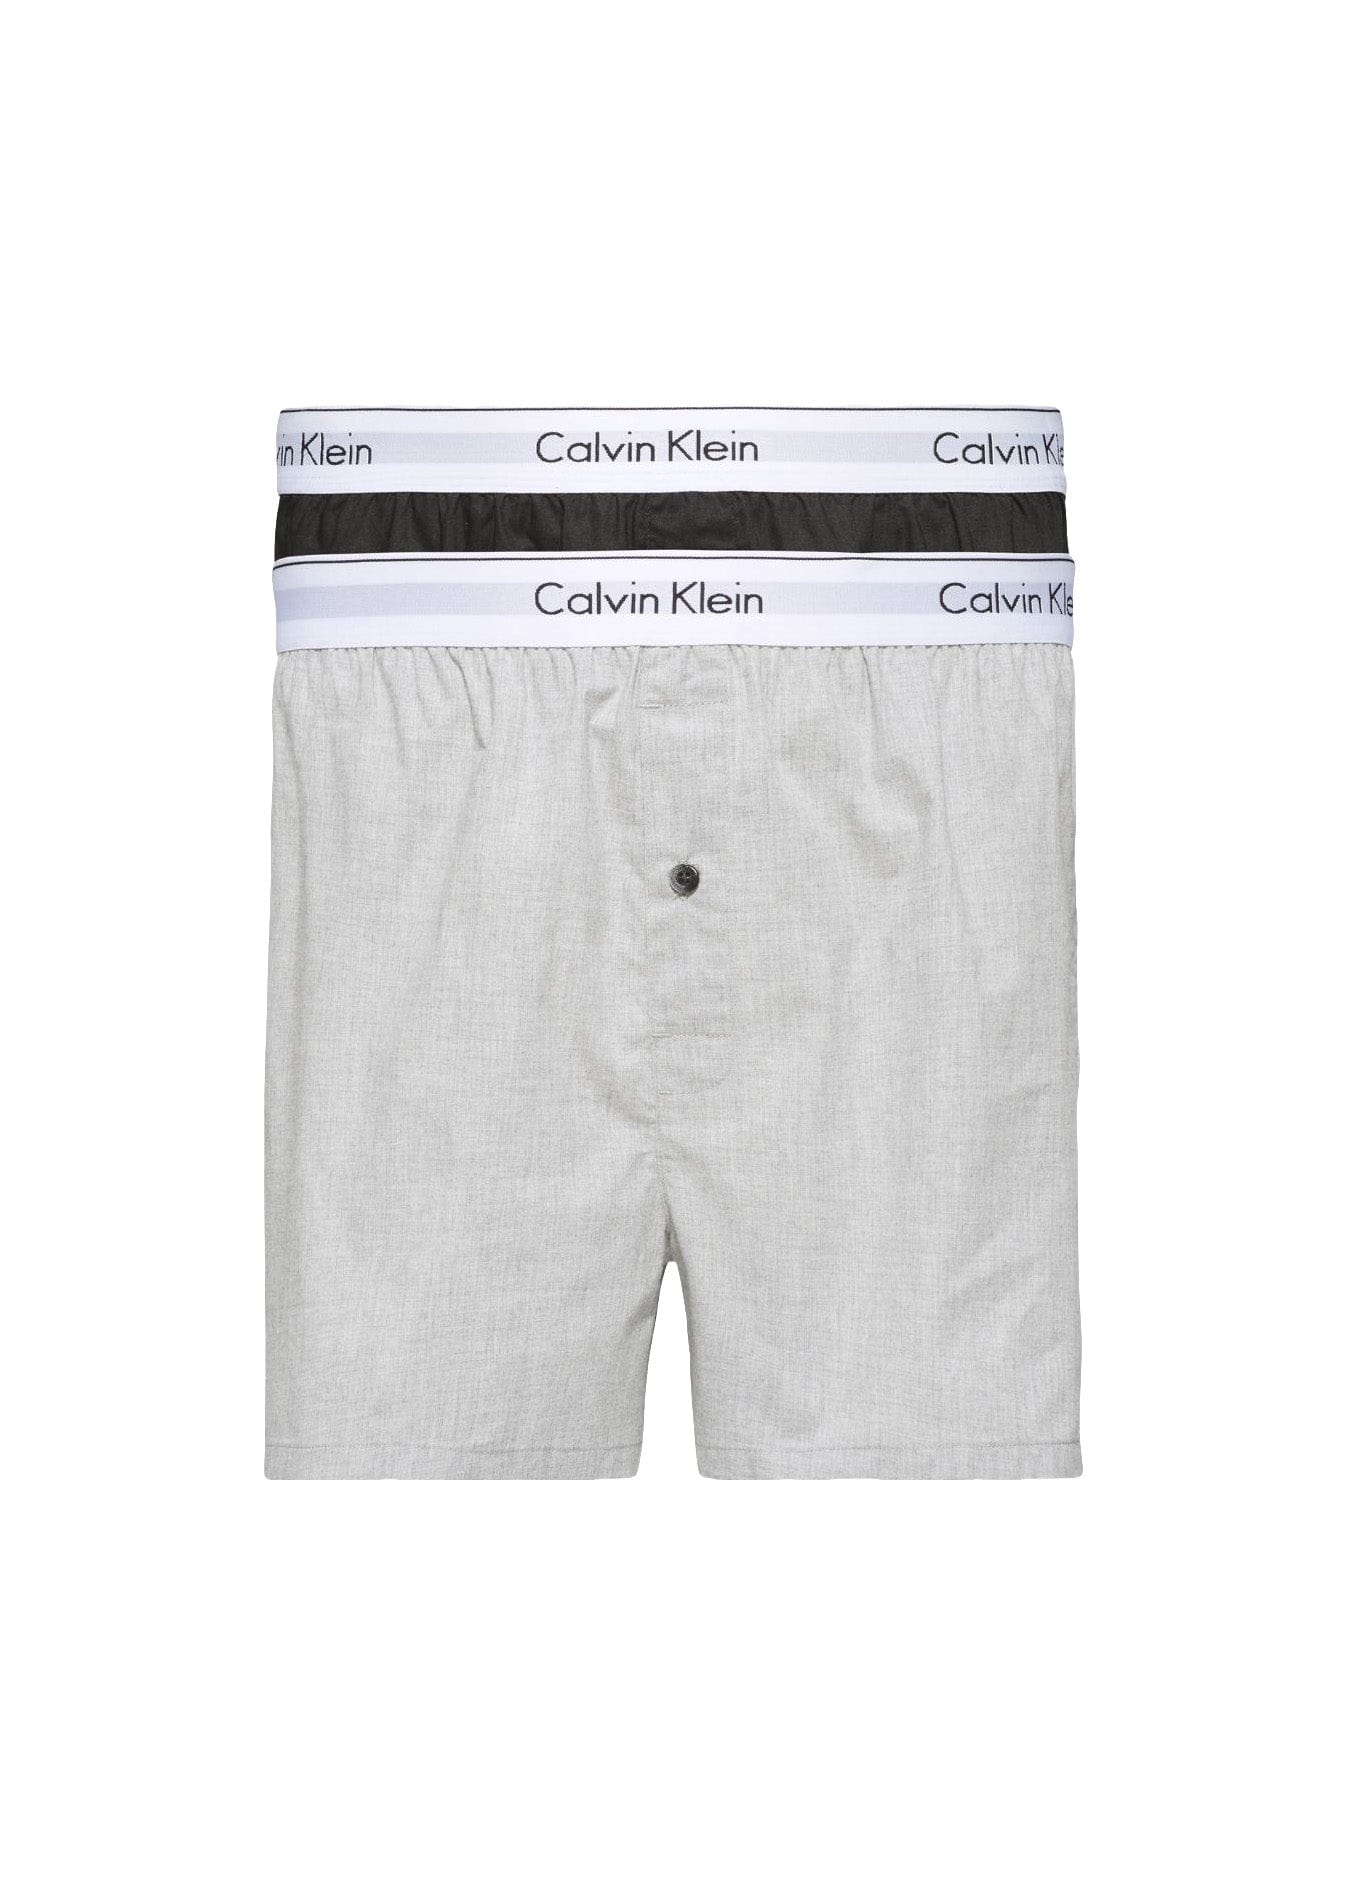 Calvin Klein Modern Cotton Stretch 2 Pack Slim Fit Boxers - Black/Grey  Heather – Potters of Buxton